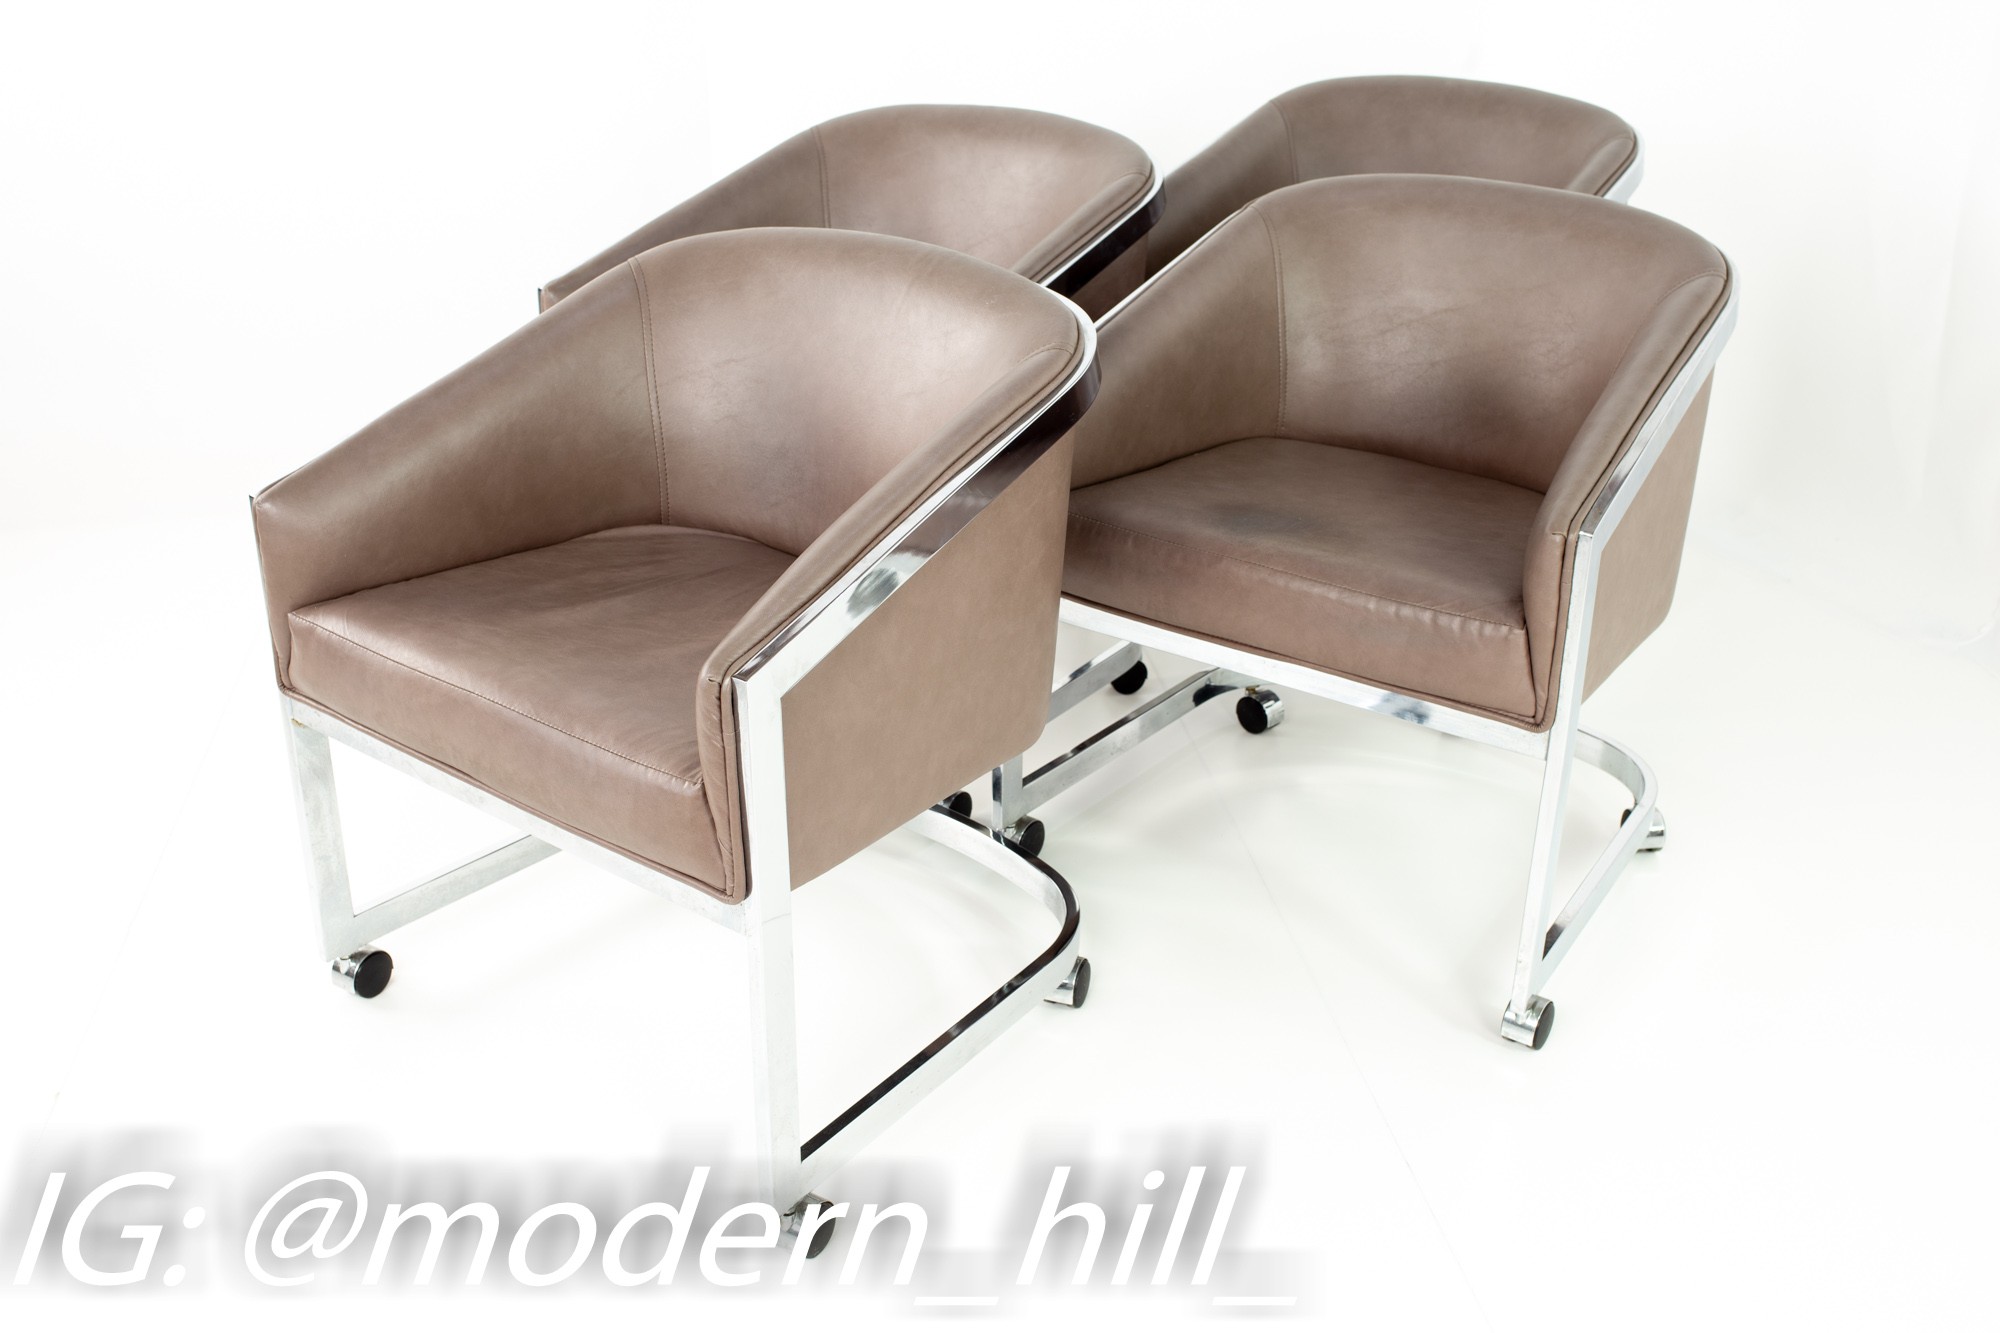 Milo Baughman for Design Institute of America Mid Century Modern Chrome Side Lounge Club Chairs with Casters - Set of 4